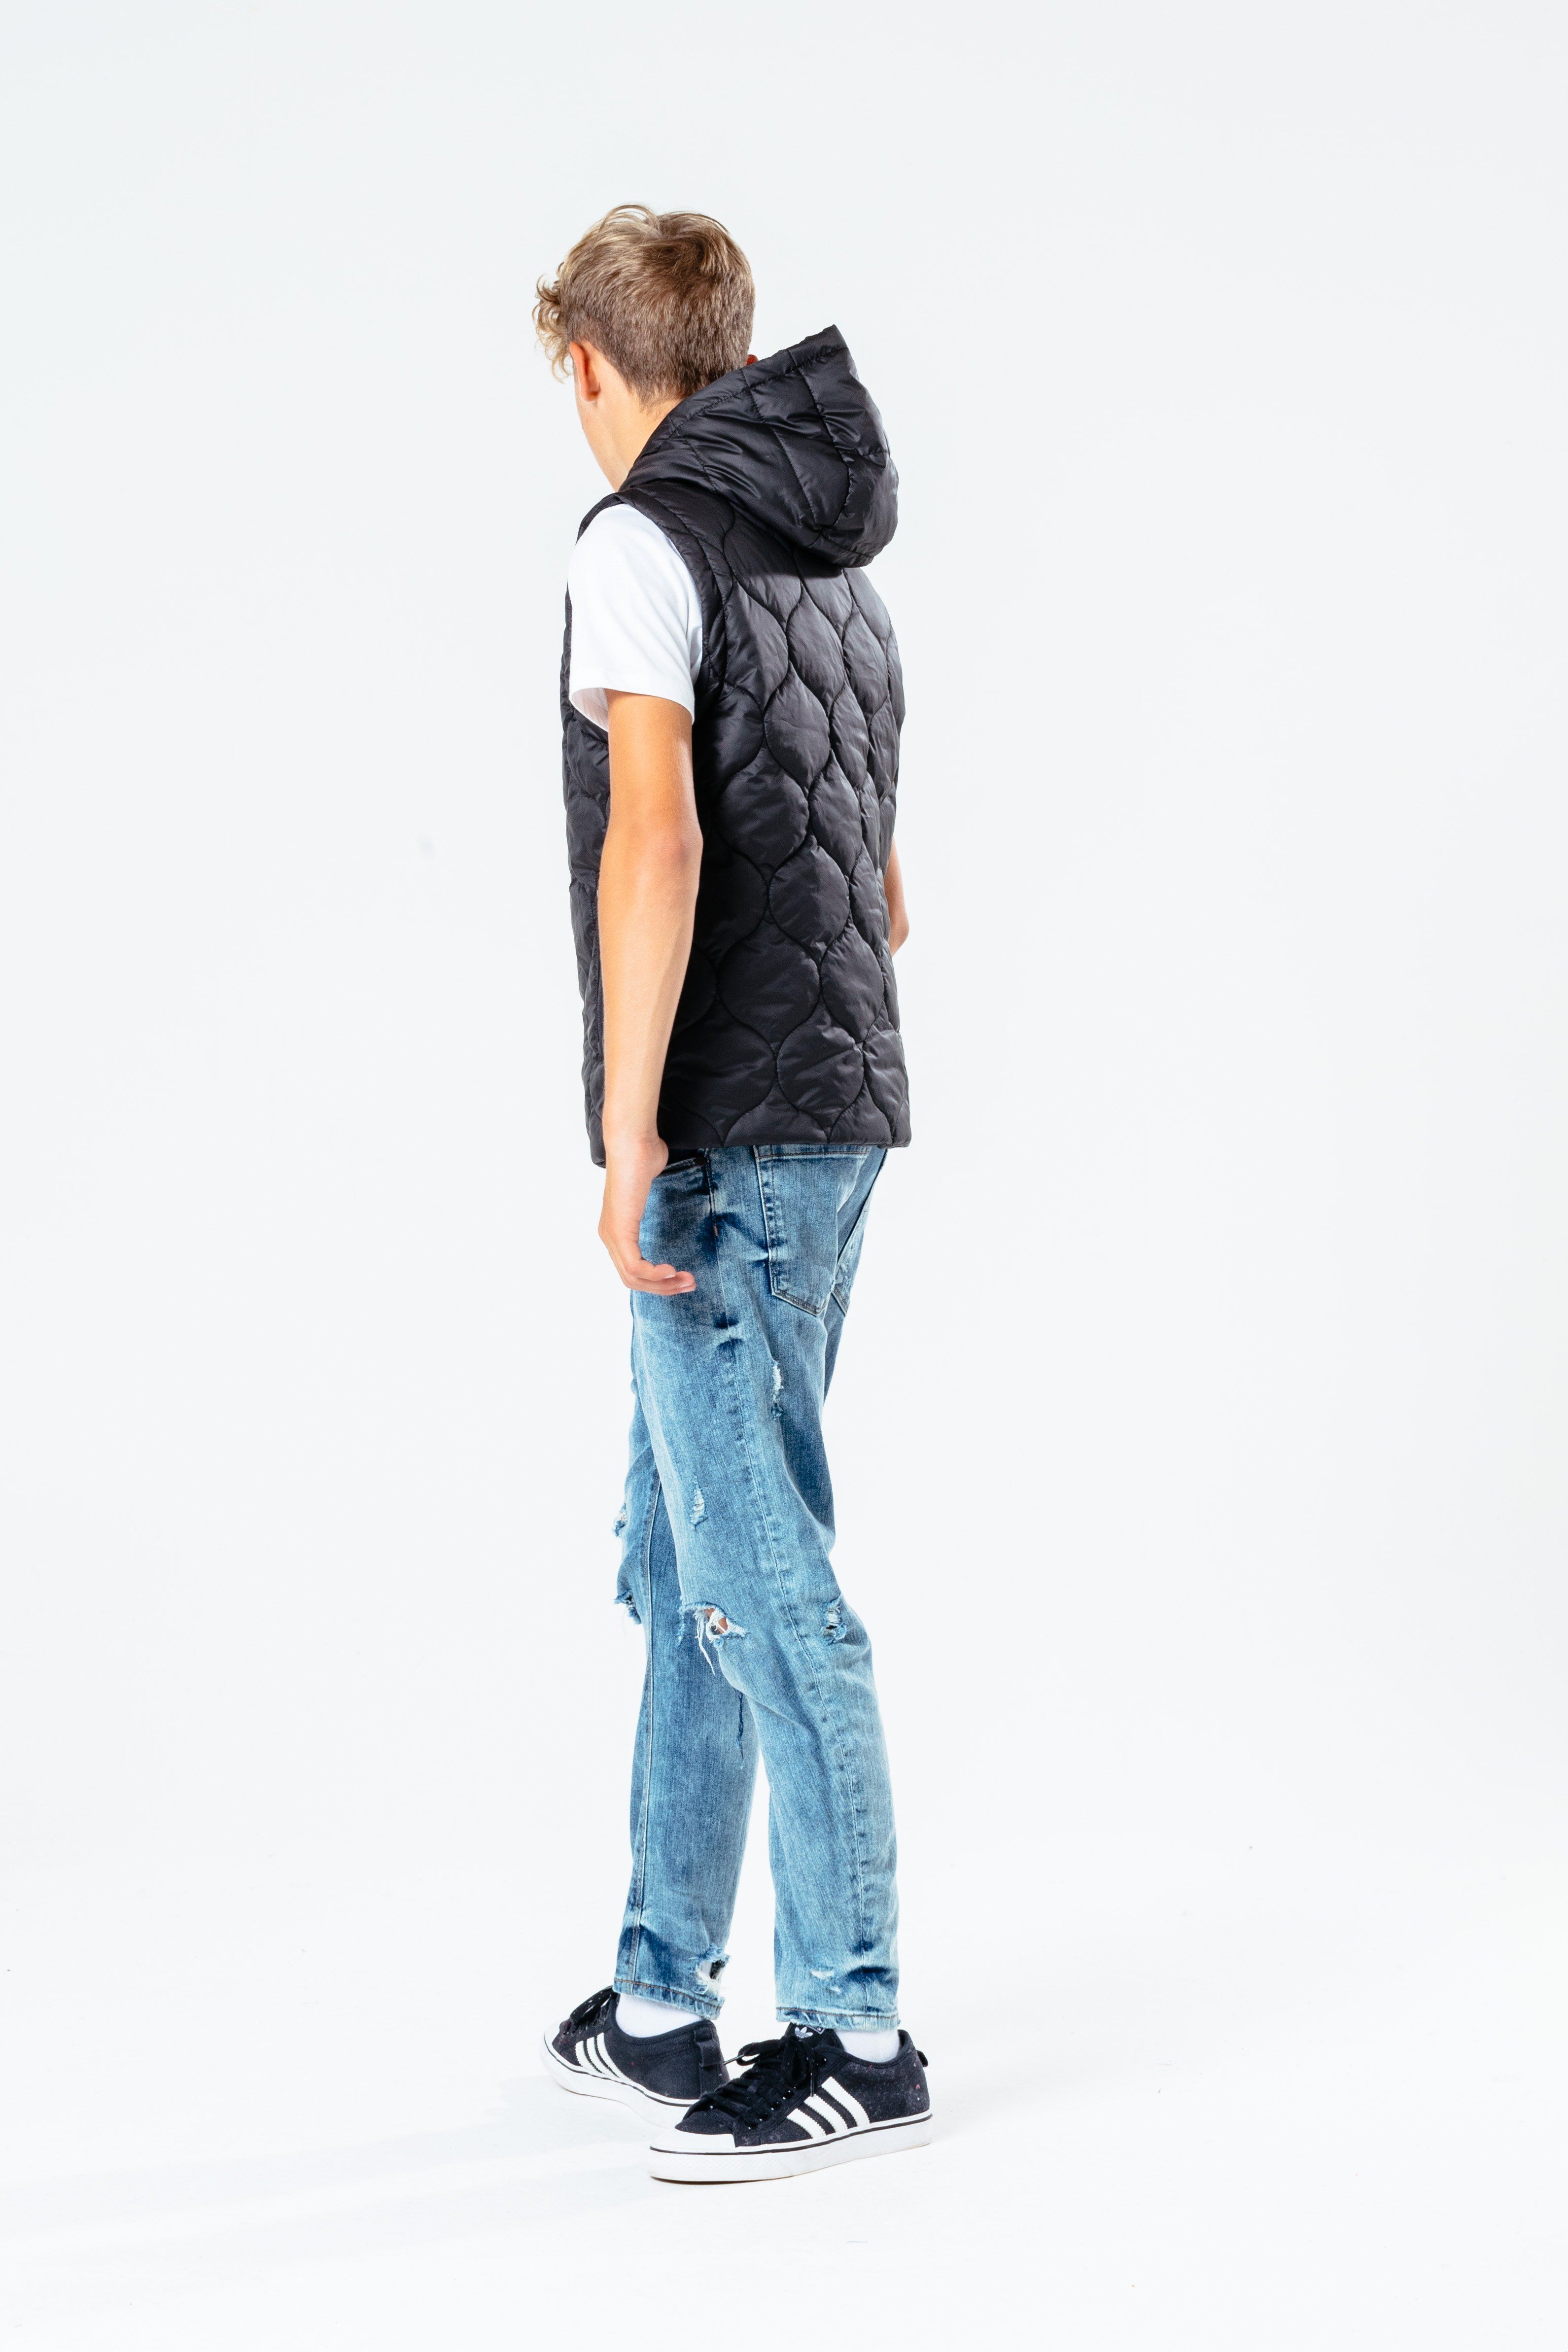 The HYPE. black gilet, the perfect in-between when your mum says you need to wear a jacket. With an 's' quilt detail in the upmost comfort fabric. Perfect to wear with a white long-sleeved t-shirt and denim jeans. Machine wash at 30 degrees.